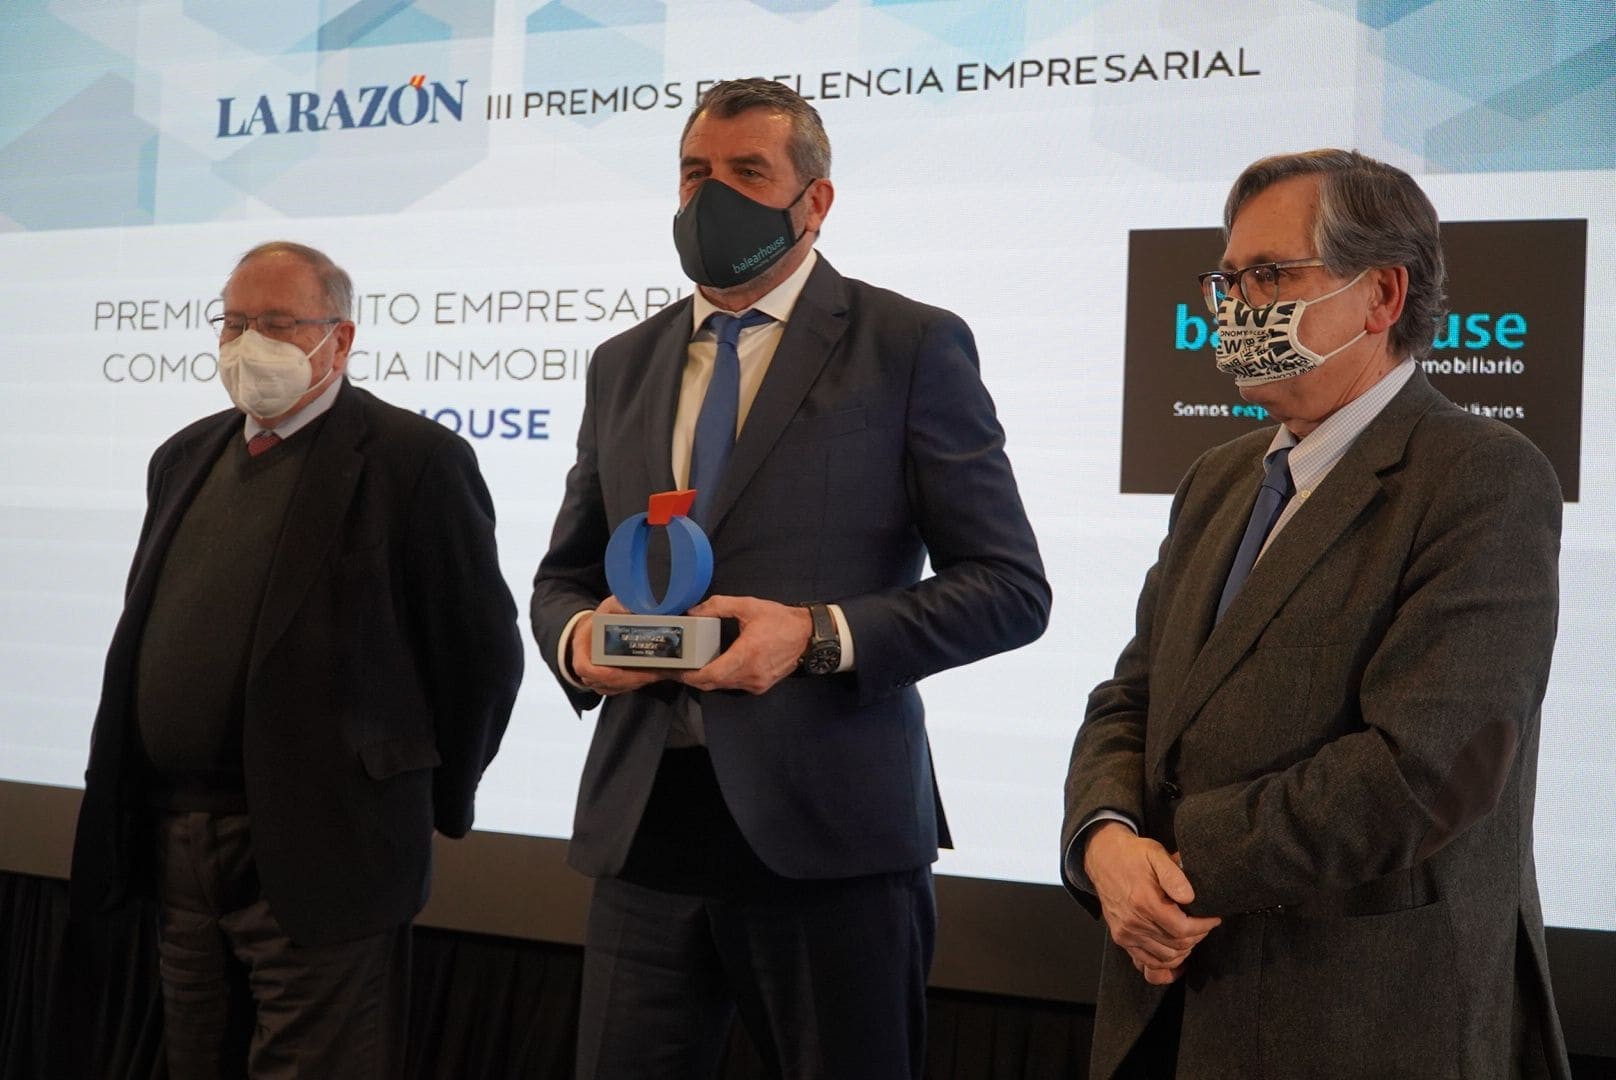 Balearhouse, national award for business excellence 2022 from the newspaper La Razón